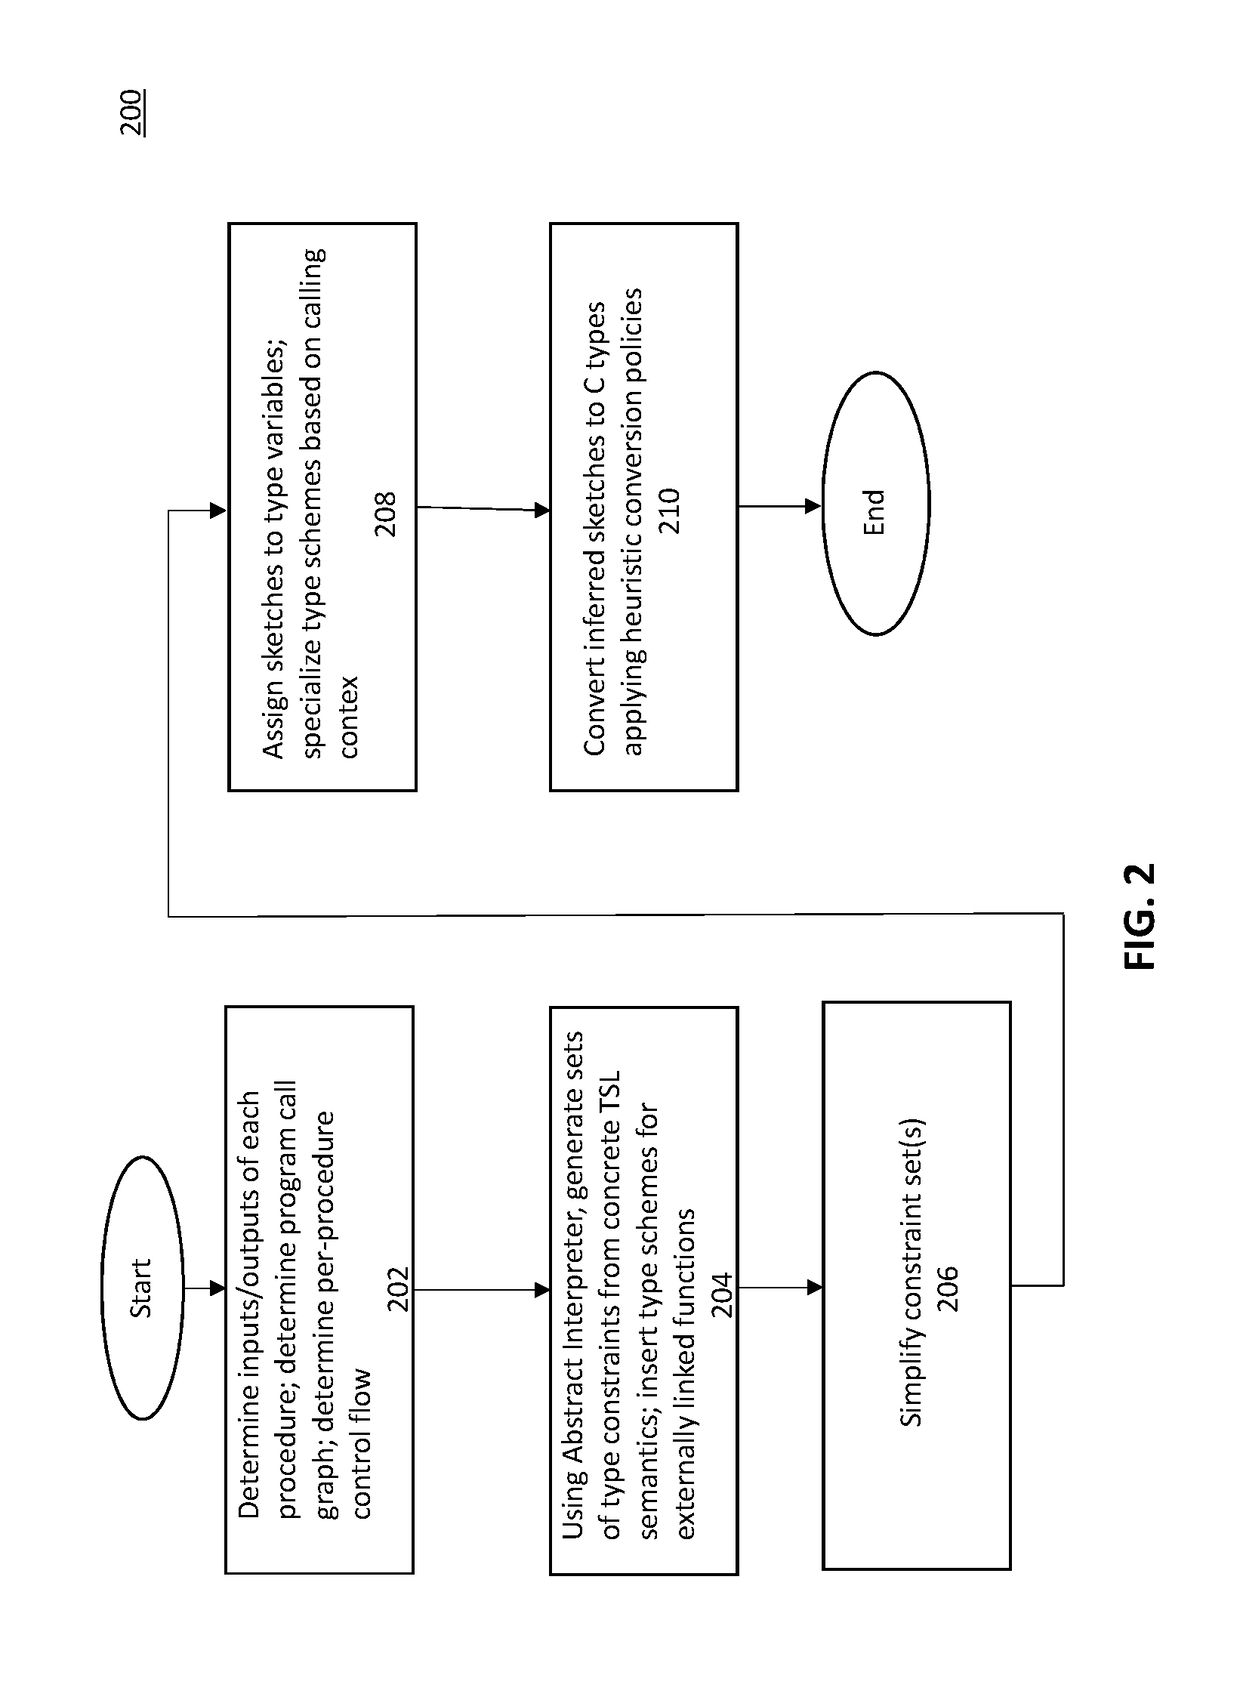 Systems and/or methods for type inference from machine code